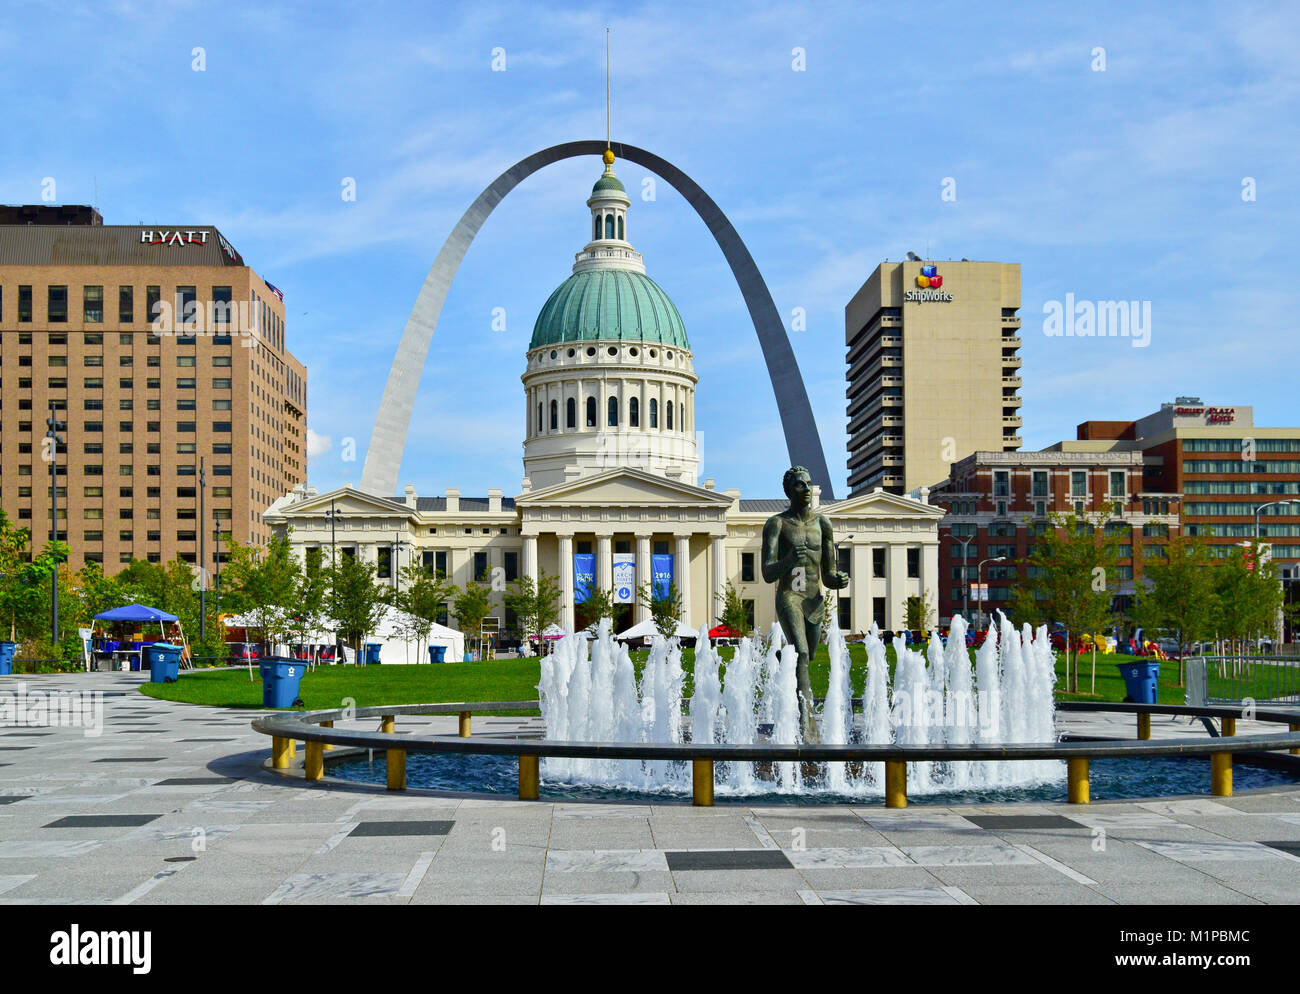 ST. LOUIS, MO, USA - SEPTEMBER 29, 2017: Statue and fountain at Kiener Plaza Park in front of the historic Old County Courthouse in St. Louis, Missour Stock Photo